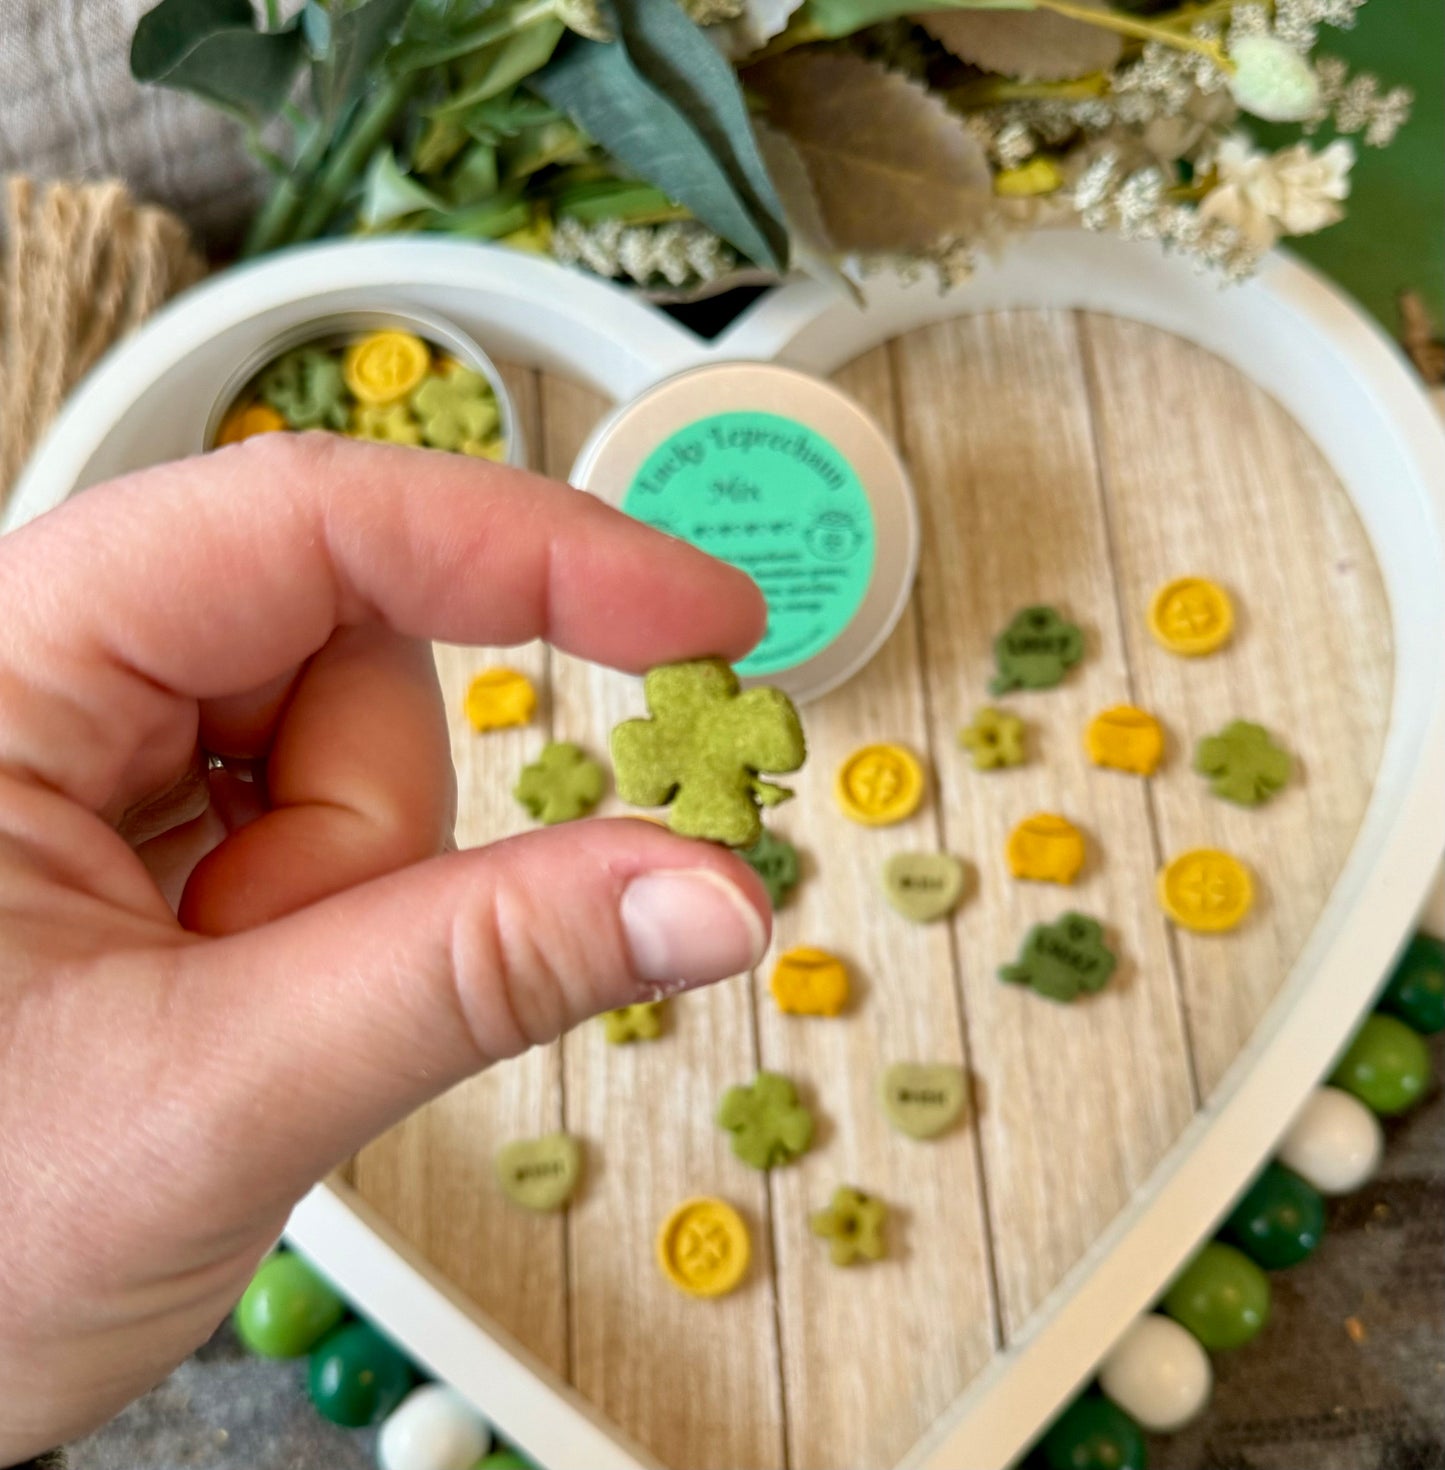 Lucky Leprechaun Mix | Delicious Bite Sized Treats for Rabbits, Guinea Pigs, Hamsters, Mice, and Small Pets, Healthy & Organic Bunny Treats